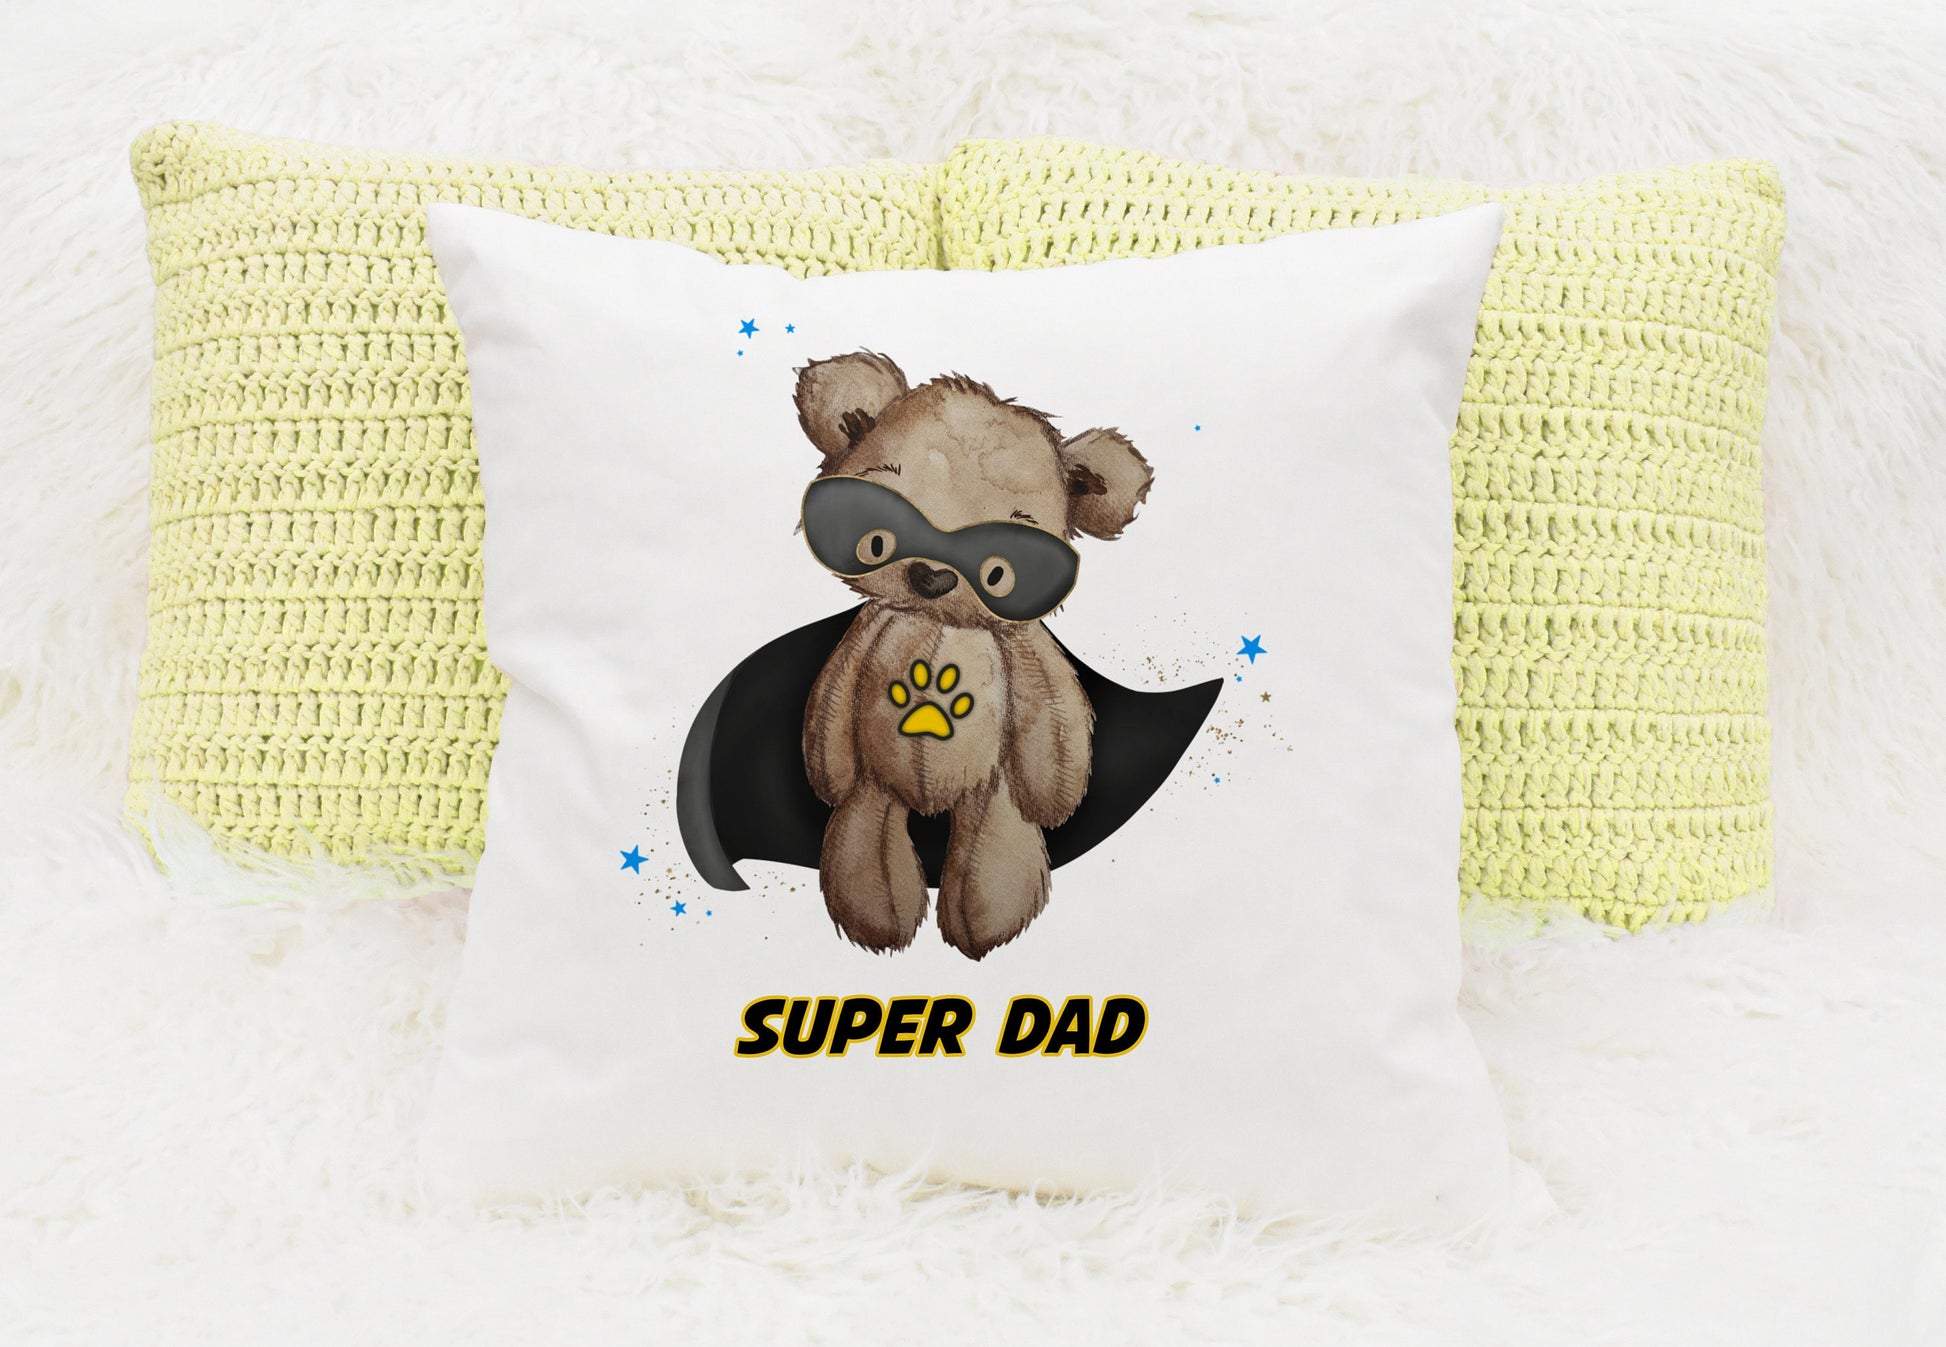 Square cushion featuring a teddy bear wearing a black cape and a black eye mask design. The text reads 'Super dad'